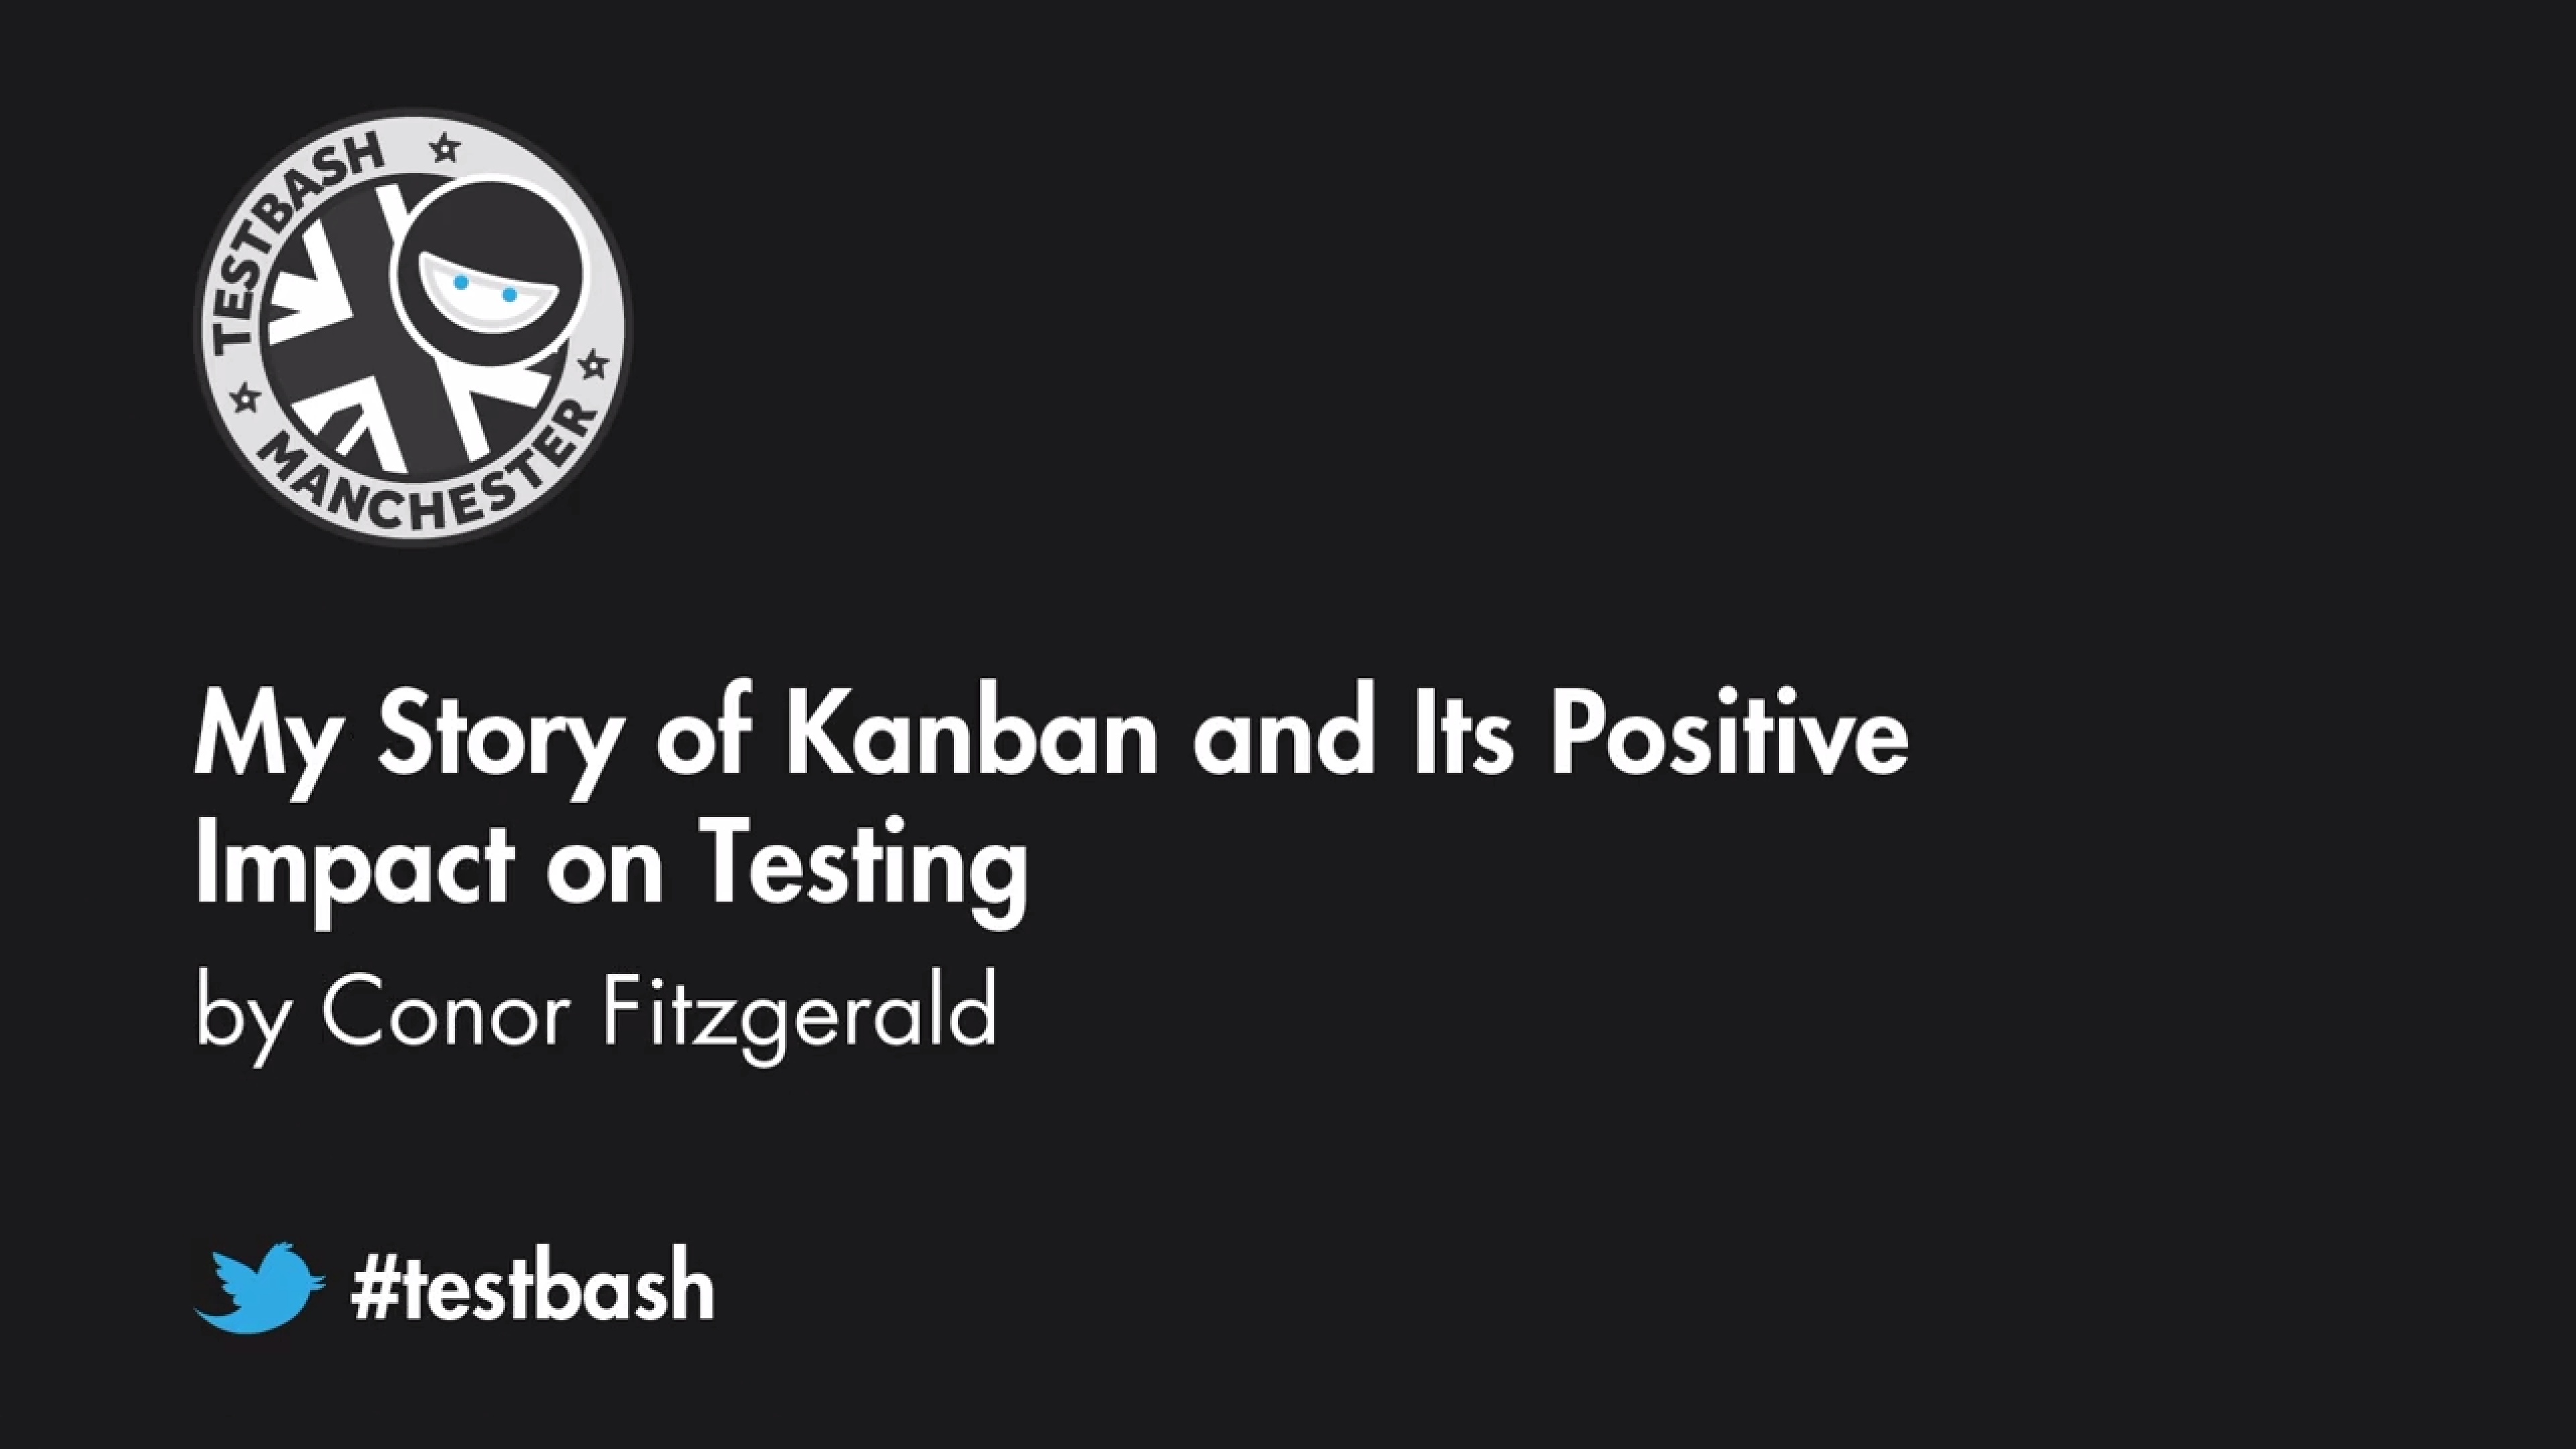 My Story of Kanban and Its Positive Impact on Testing -  Conor Fitzgerald